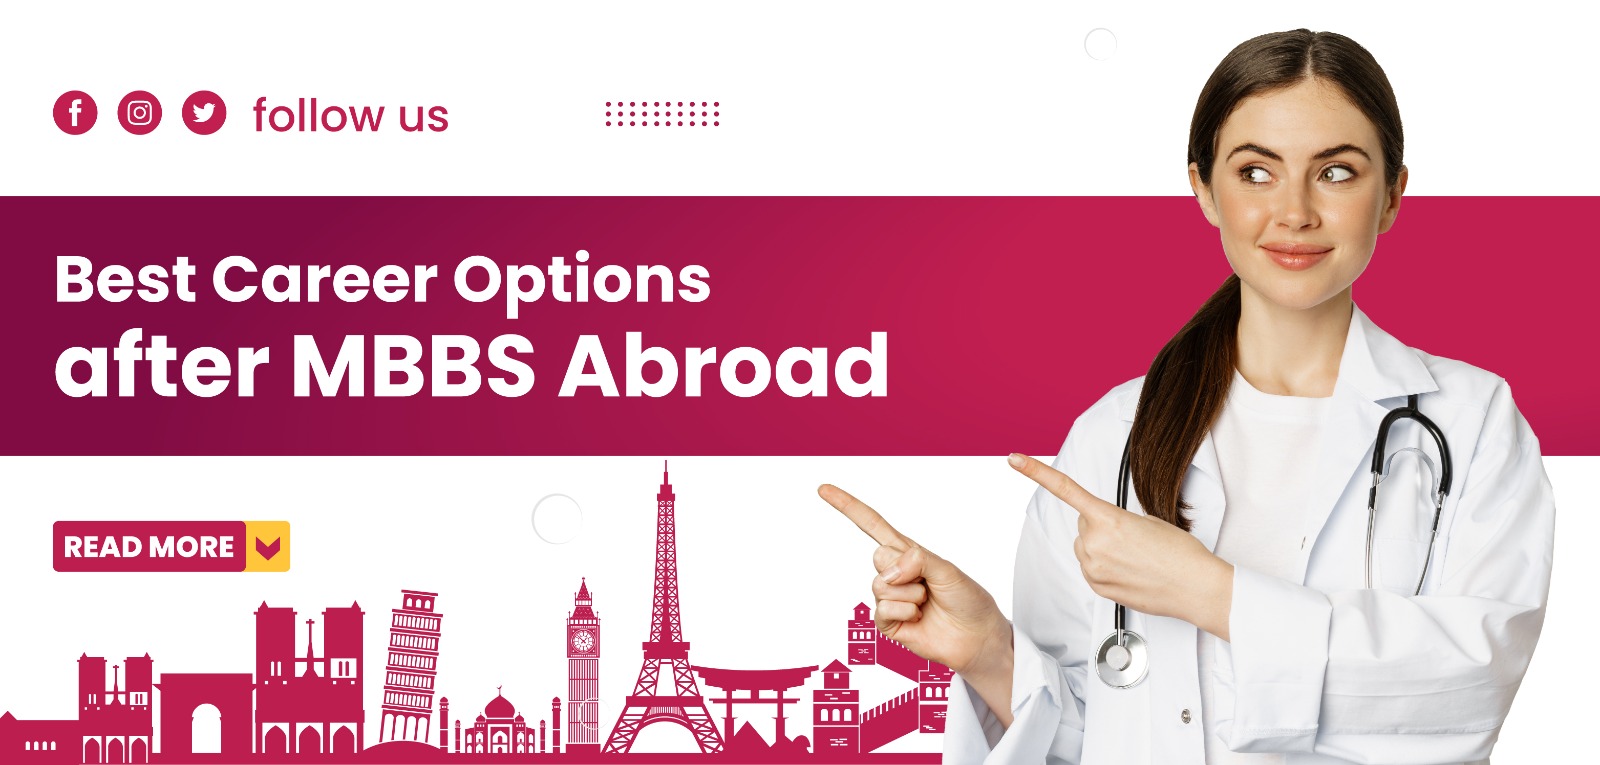 Best Career Options after MBBS Abroad